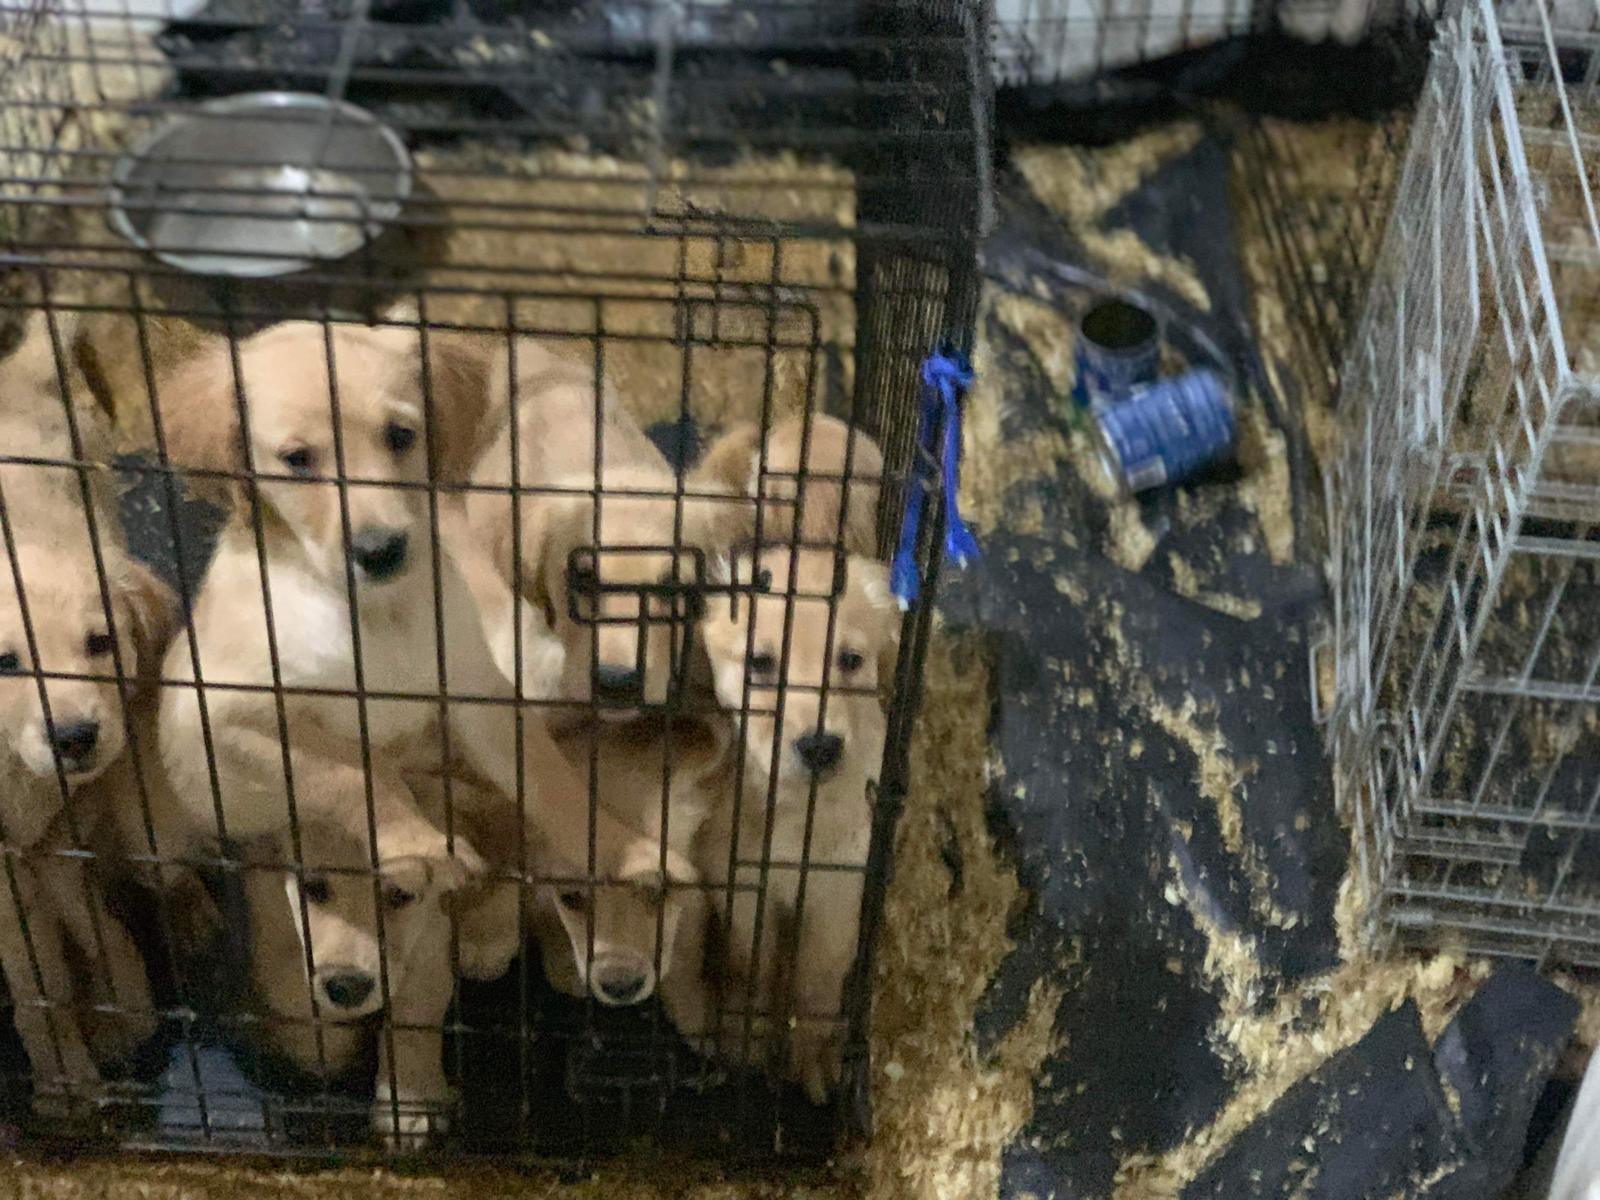 14 puppies and a dog were discovered at home which was covered in faeces and rubbish.